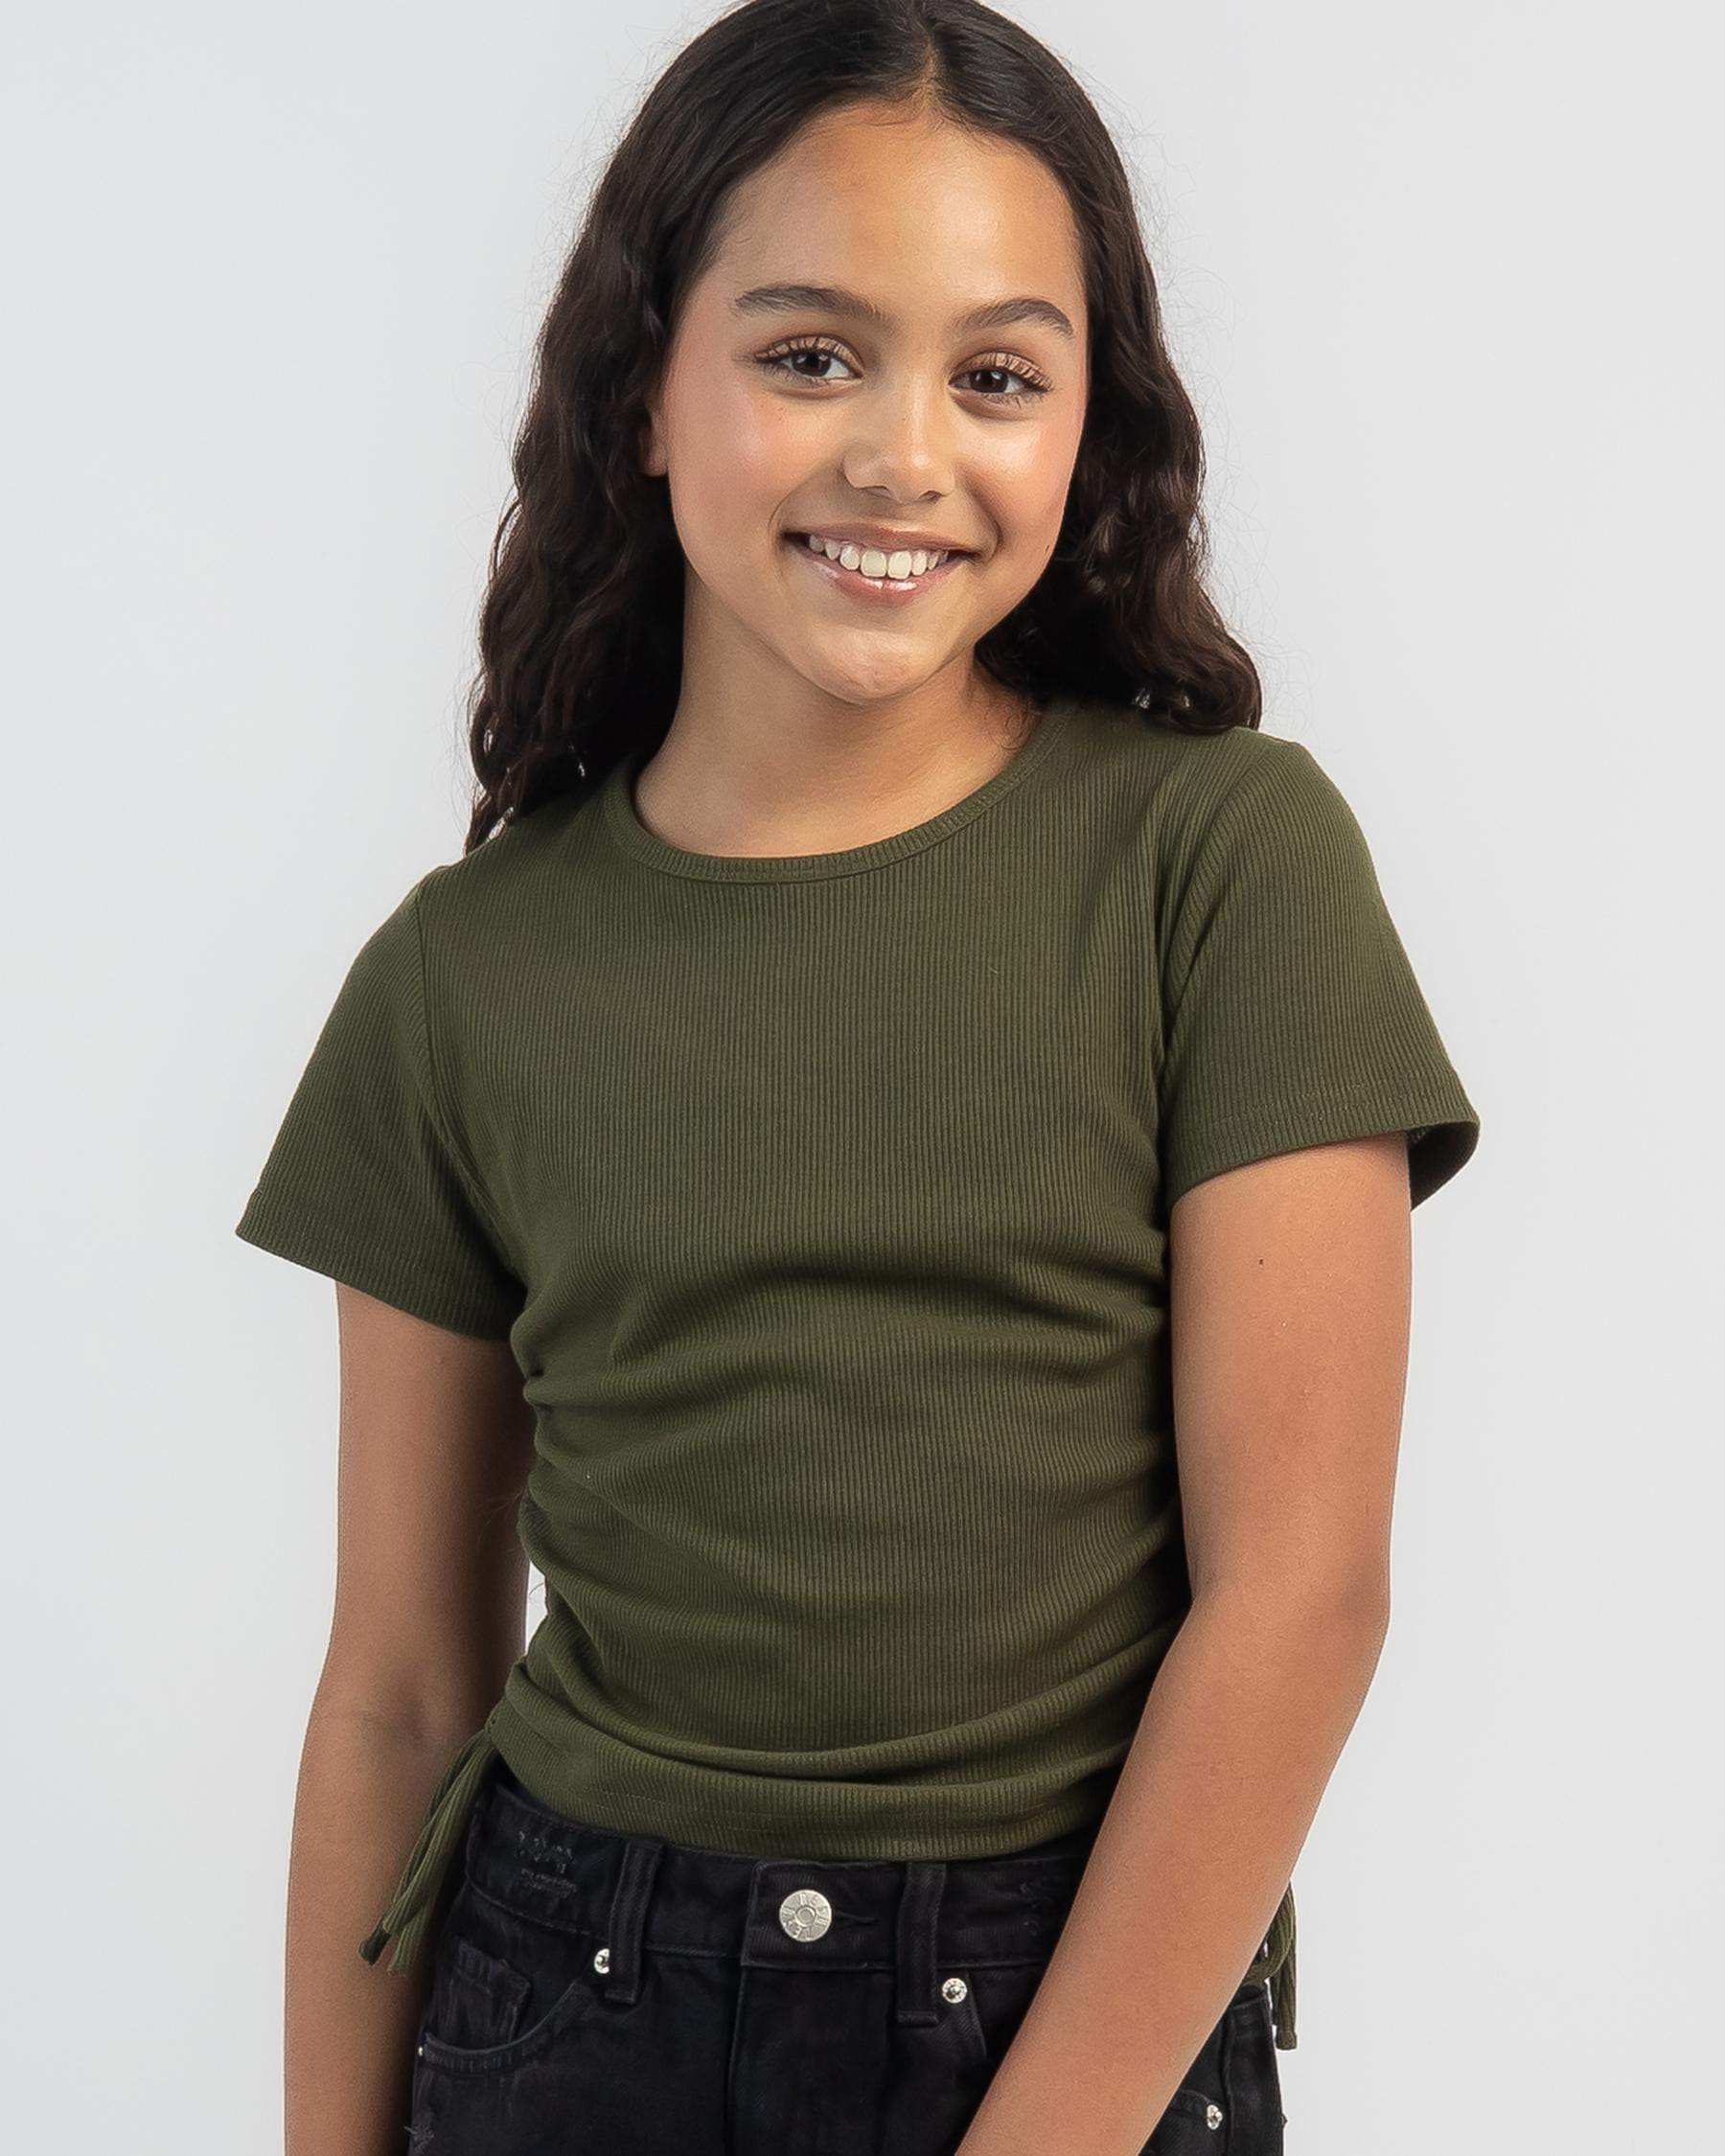 Ava And Ever Girls' Kenny Top In Khaki - Fast Shipping & Easy Returns ...